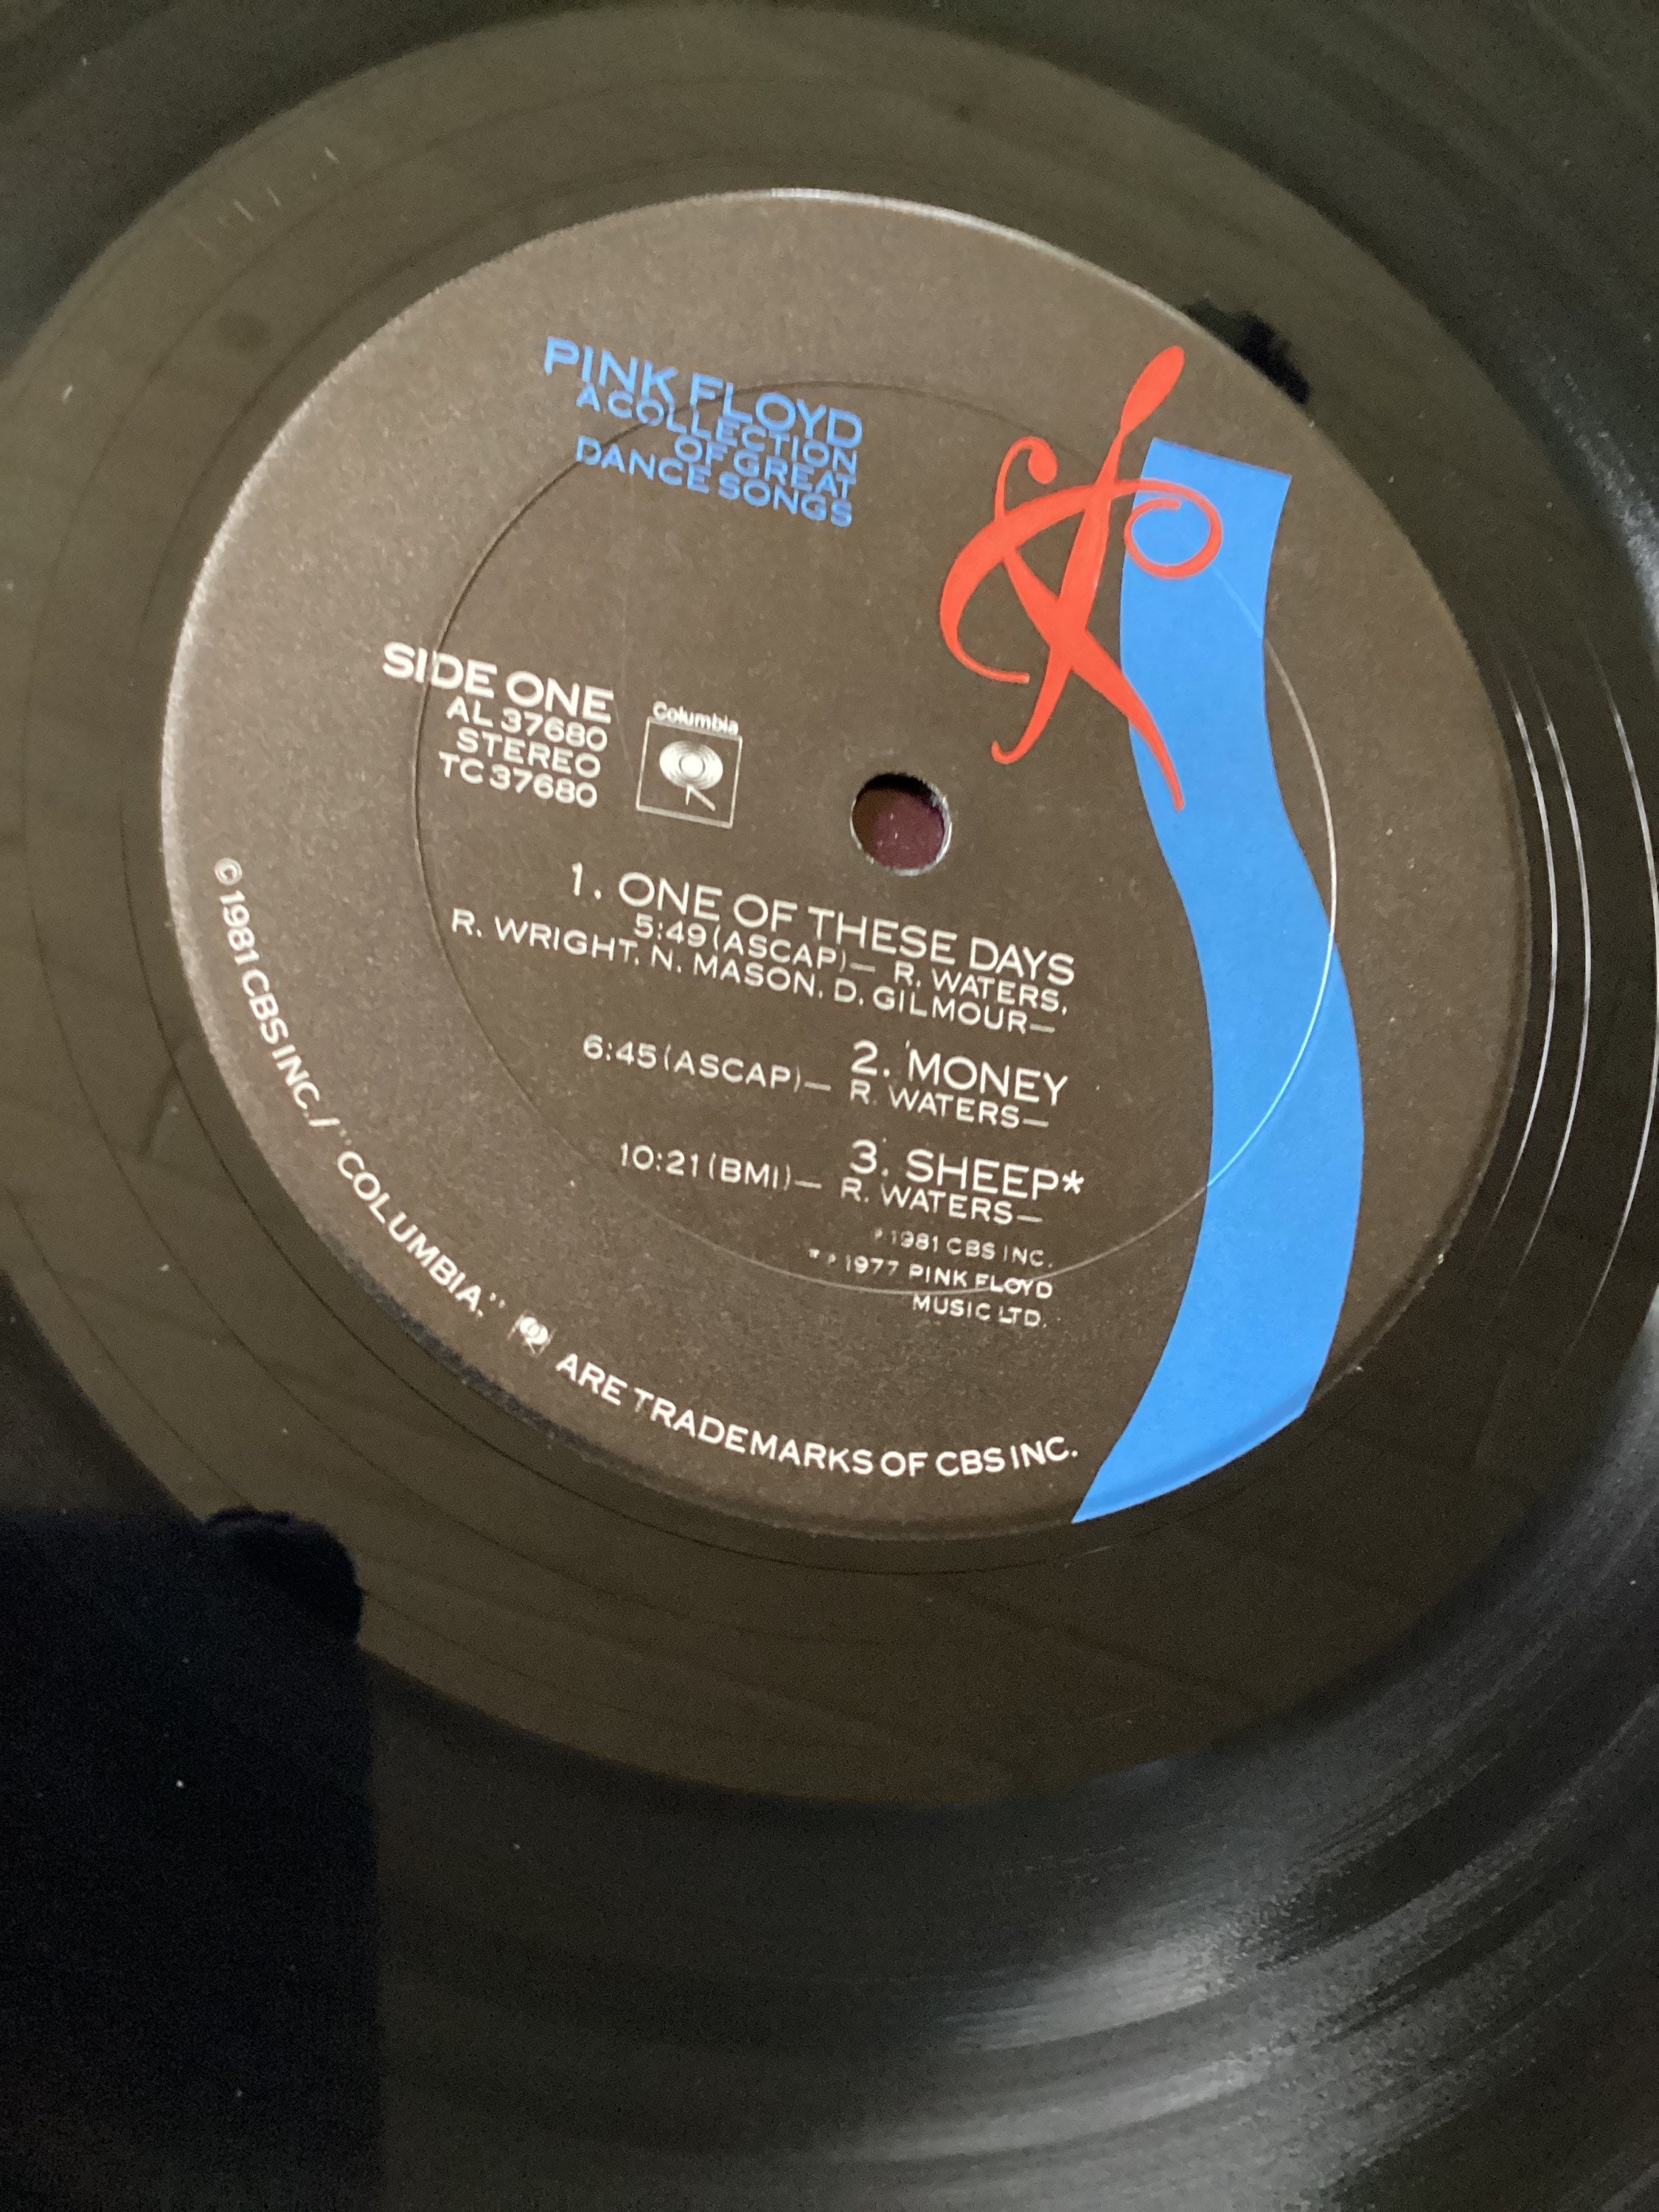 PINK FLOYD - A COLLECTION OF GREAT DANCE SONGS VINILO